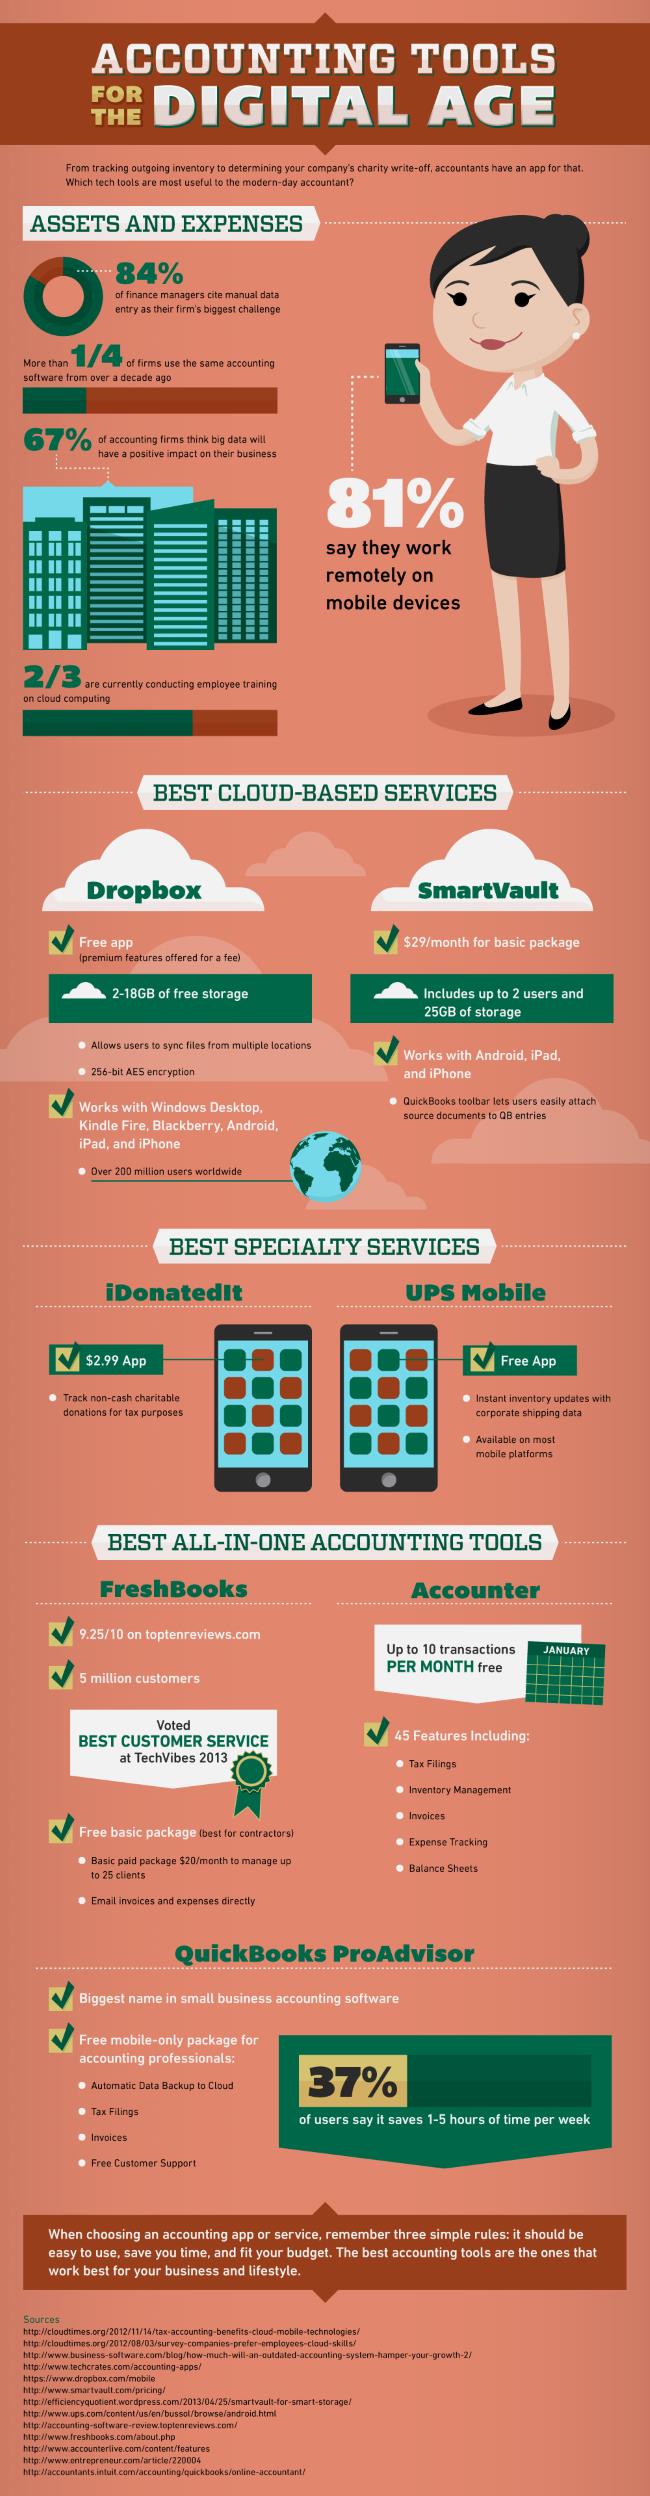 Accounting Tools for the Digital Age